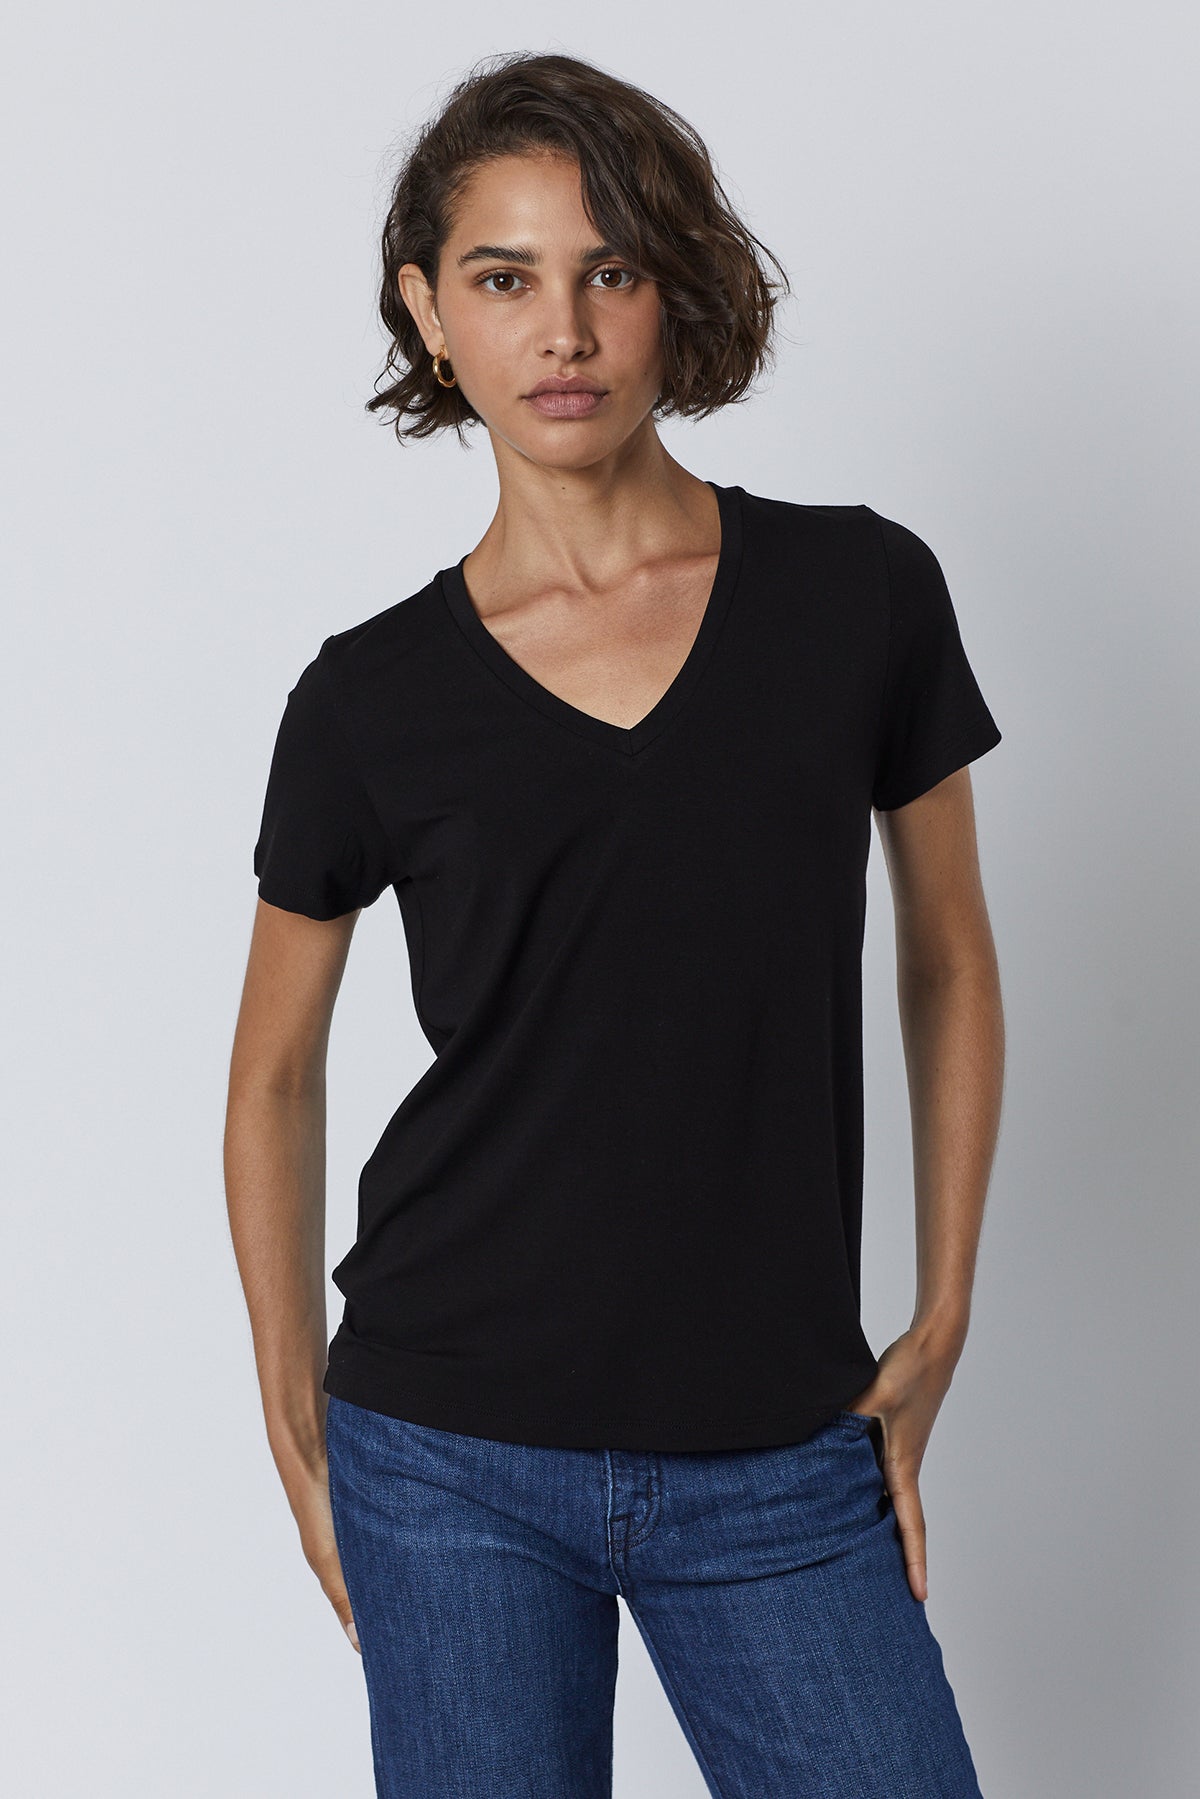 Runyon Tee in black with blue denim front-26007207182529